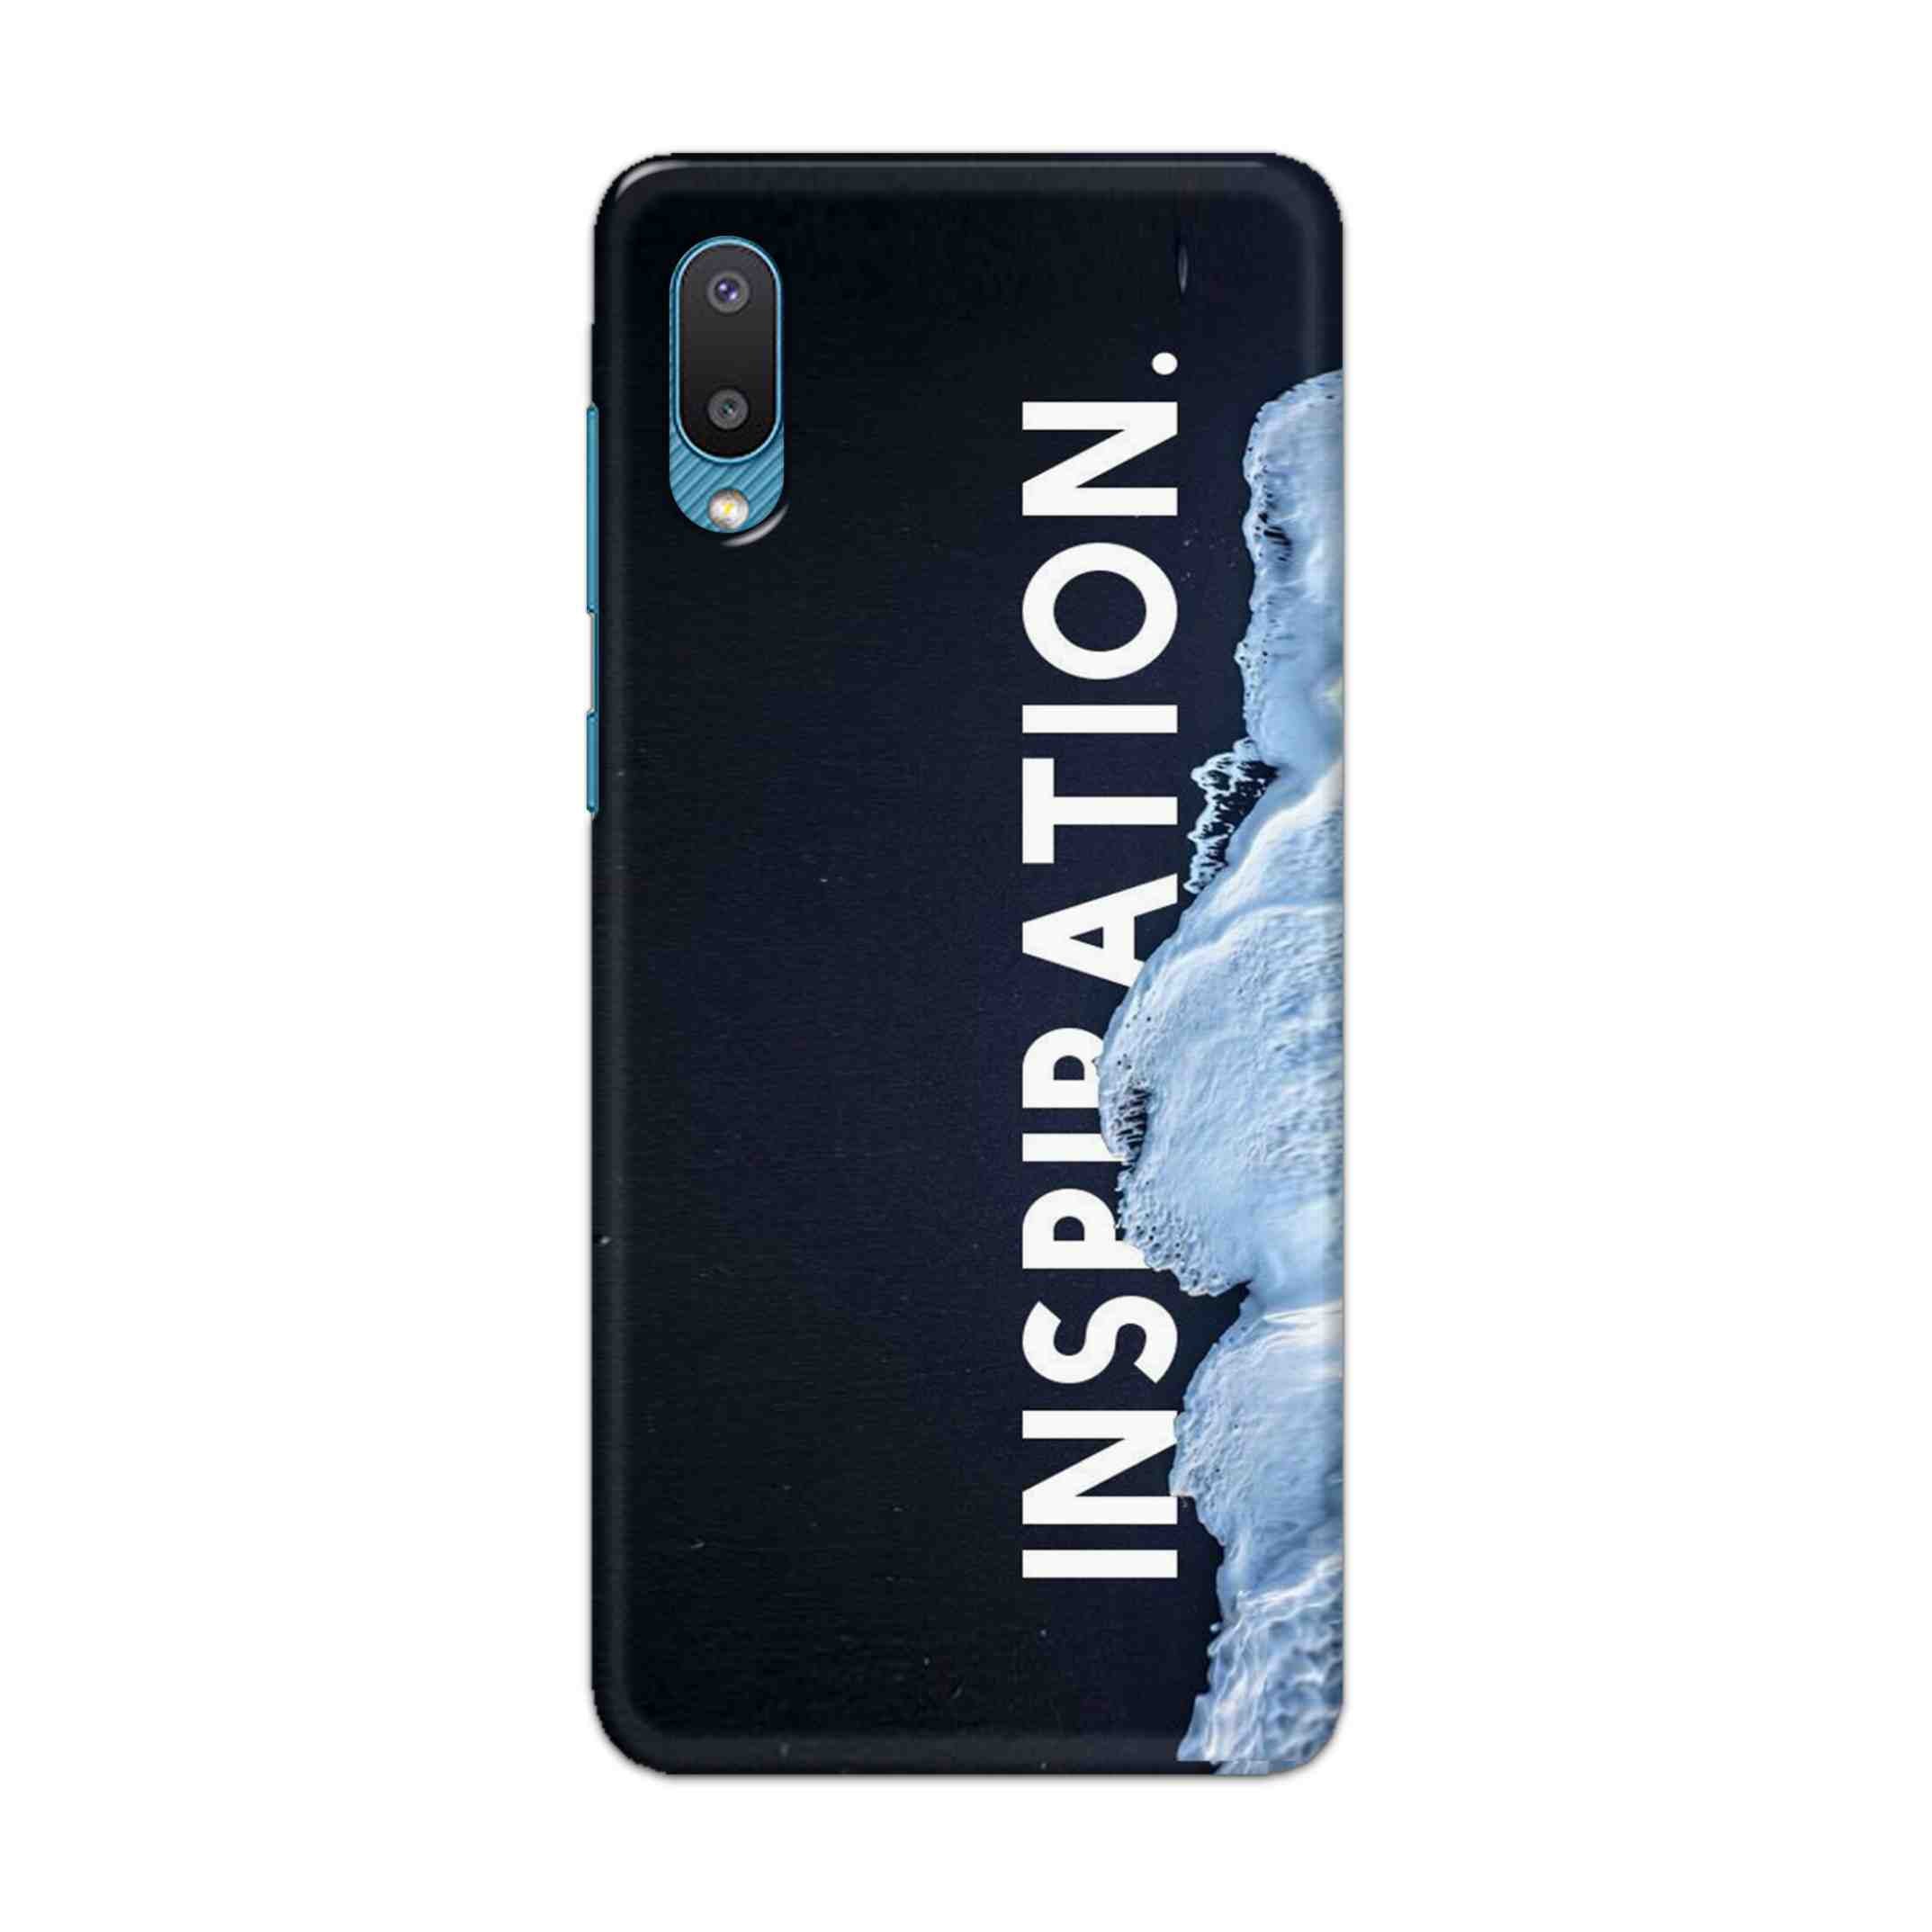 Buy Inspiration Hard Back Mobile Phone Case Cover For Samsung Galaxy M02 Online